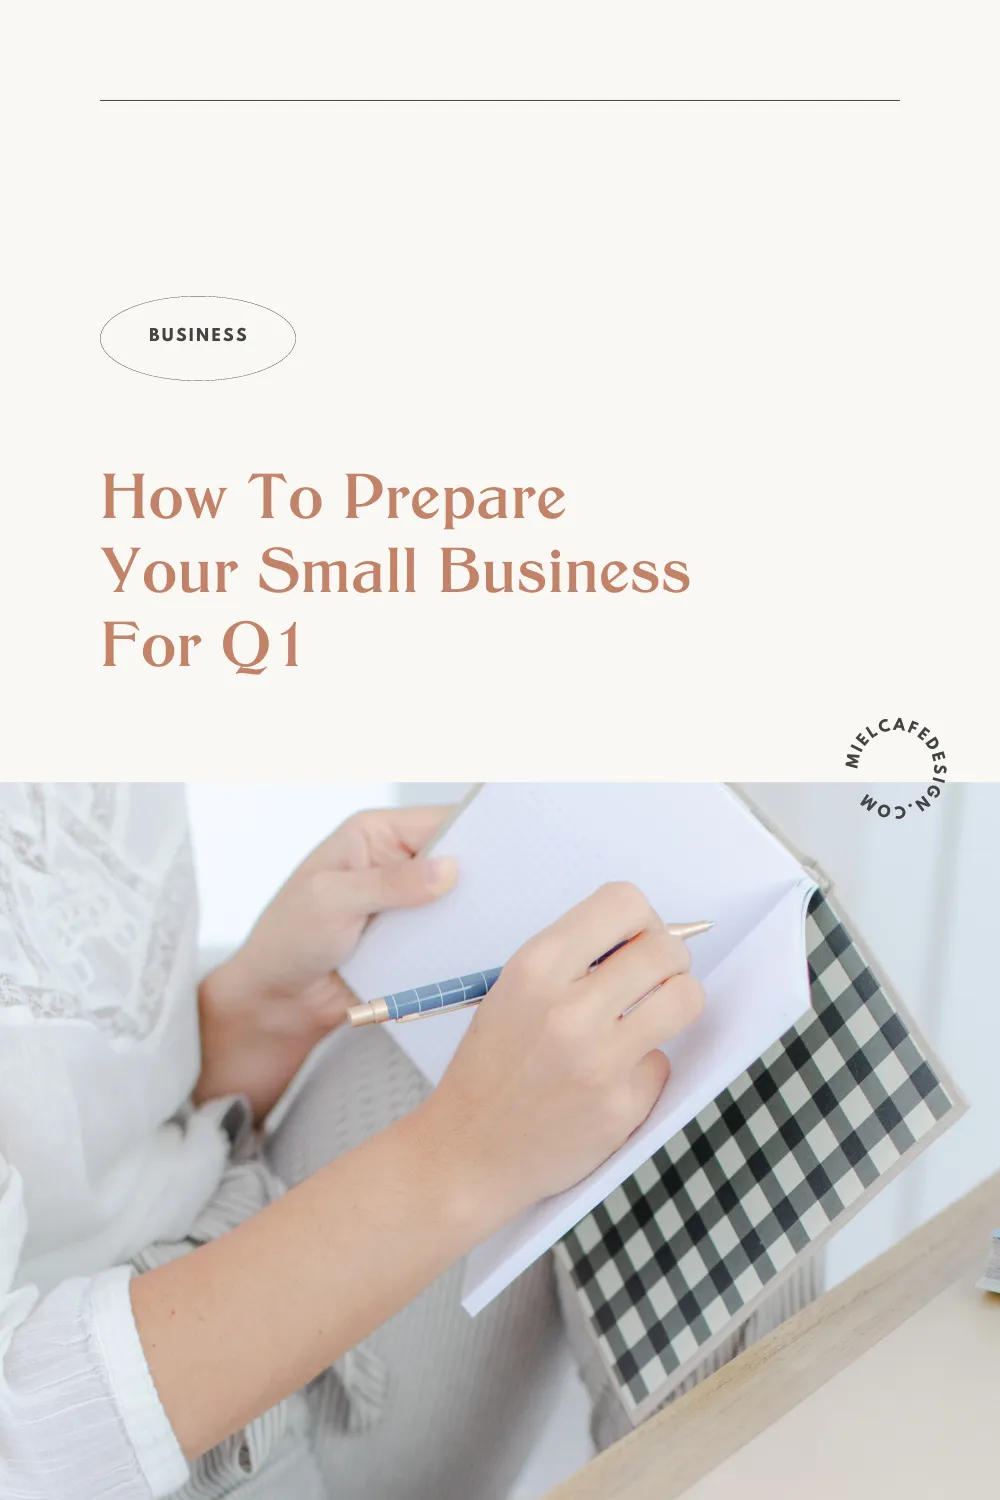 How to prepare your small business for Q1 in 4 easy steps